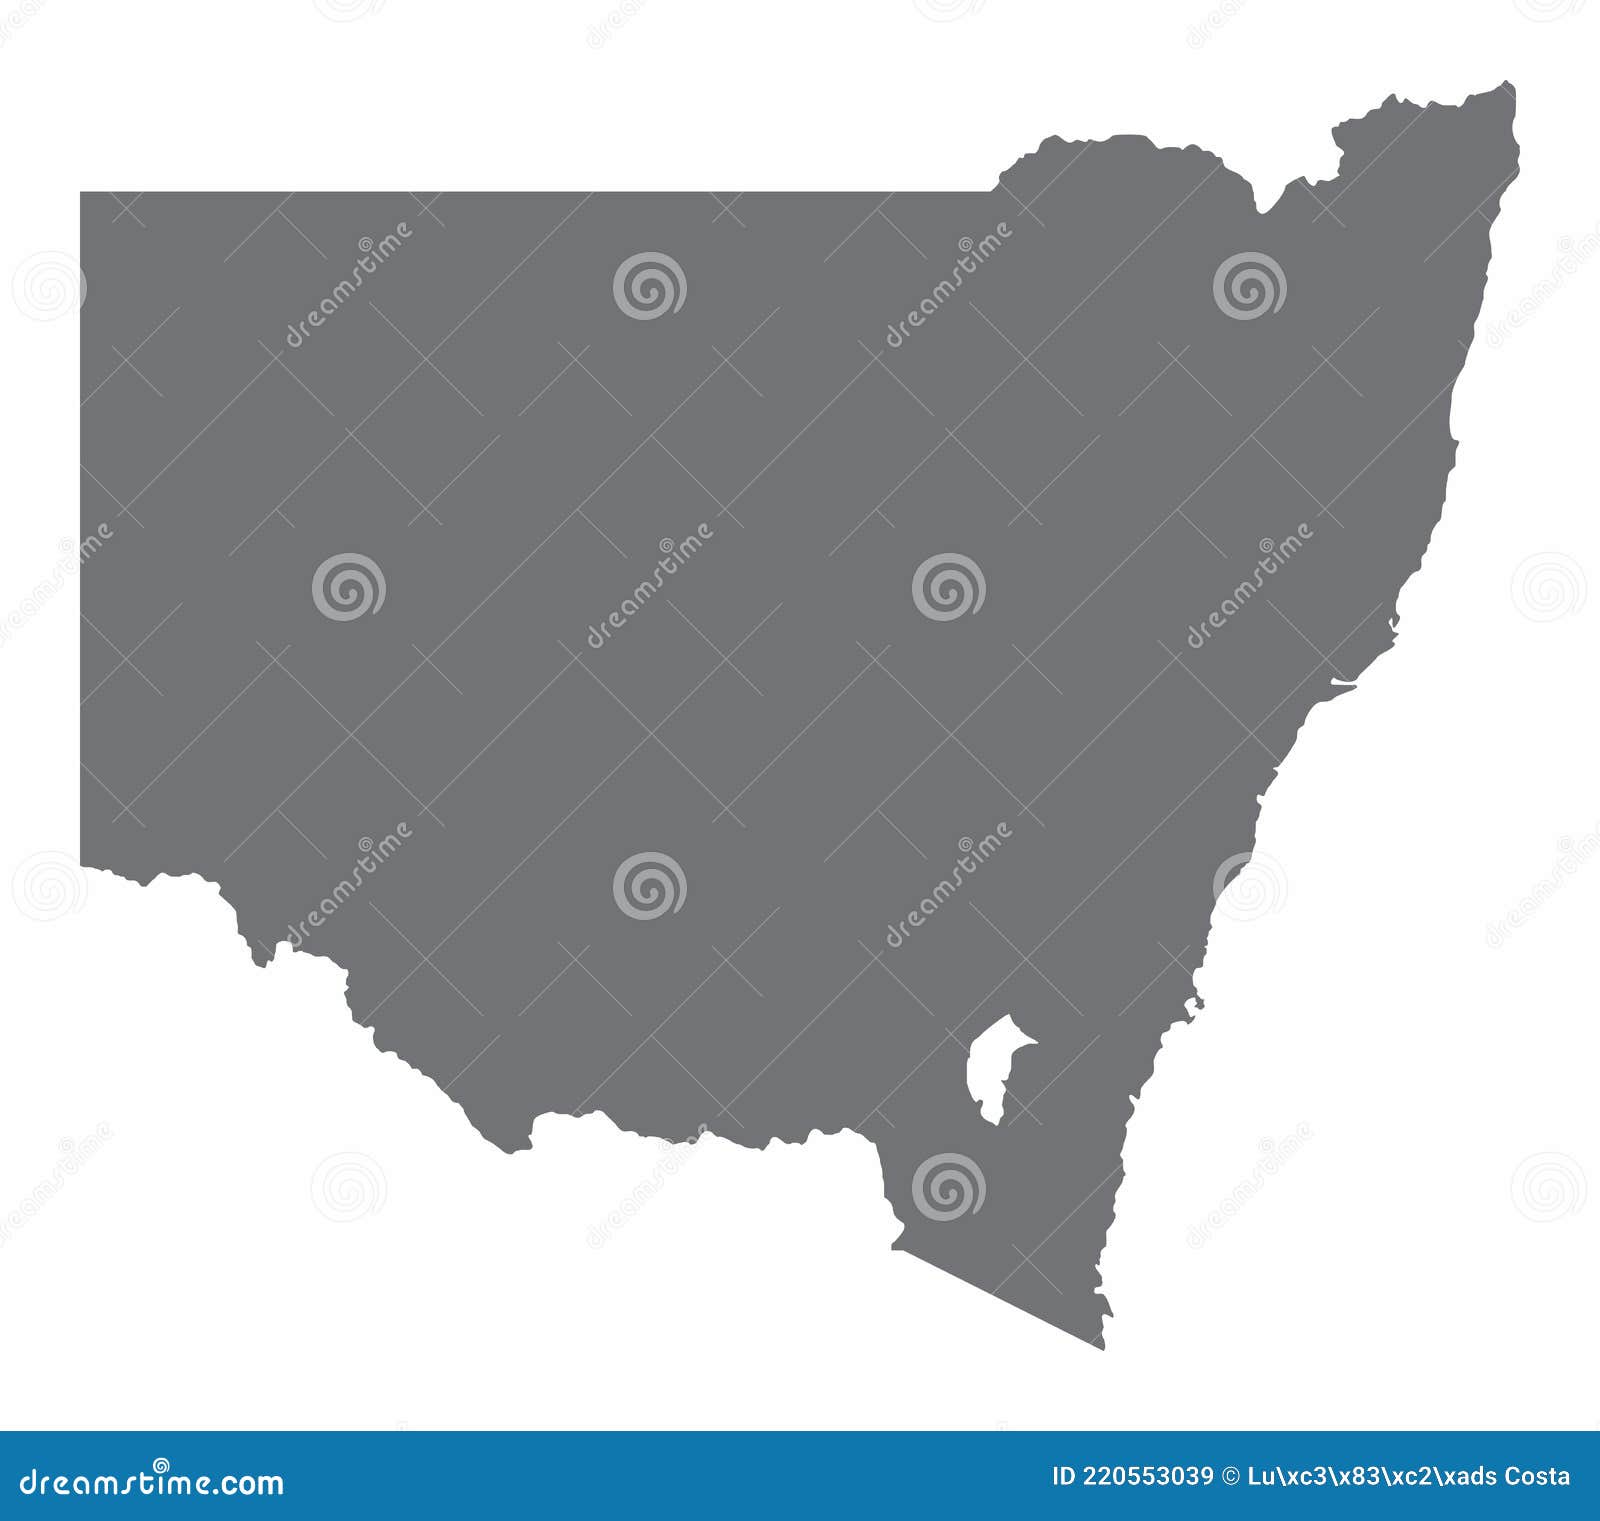 new south wales silhouette map